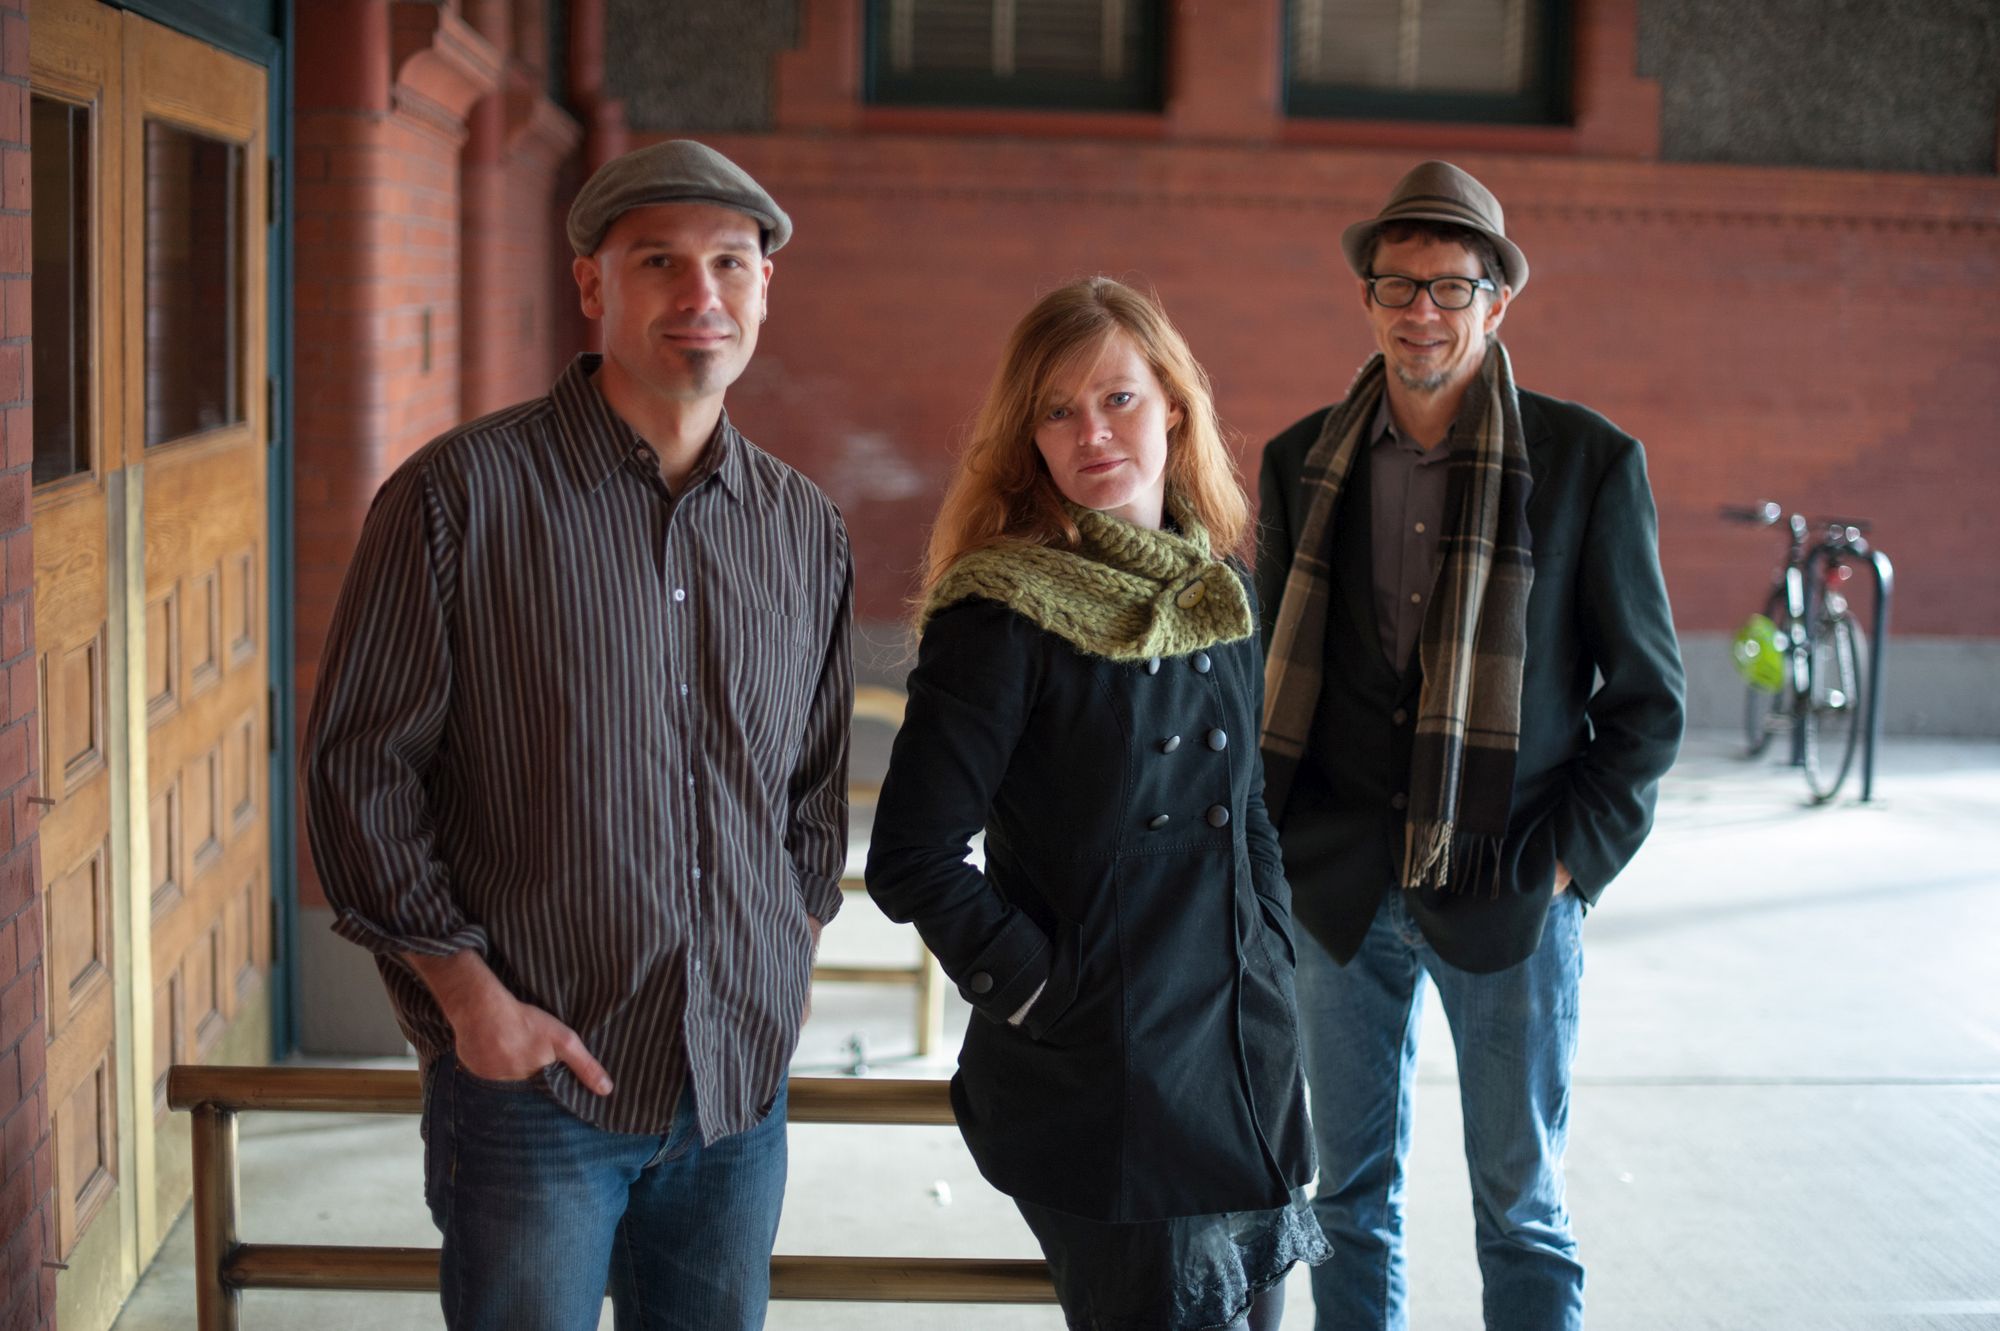 John Weed, Colleen Raney and Stuart Mason of Story Road will perform tonight at Old Liberty Theater in Ridgefield.